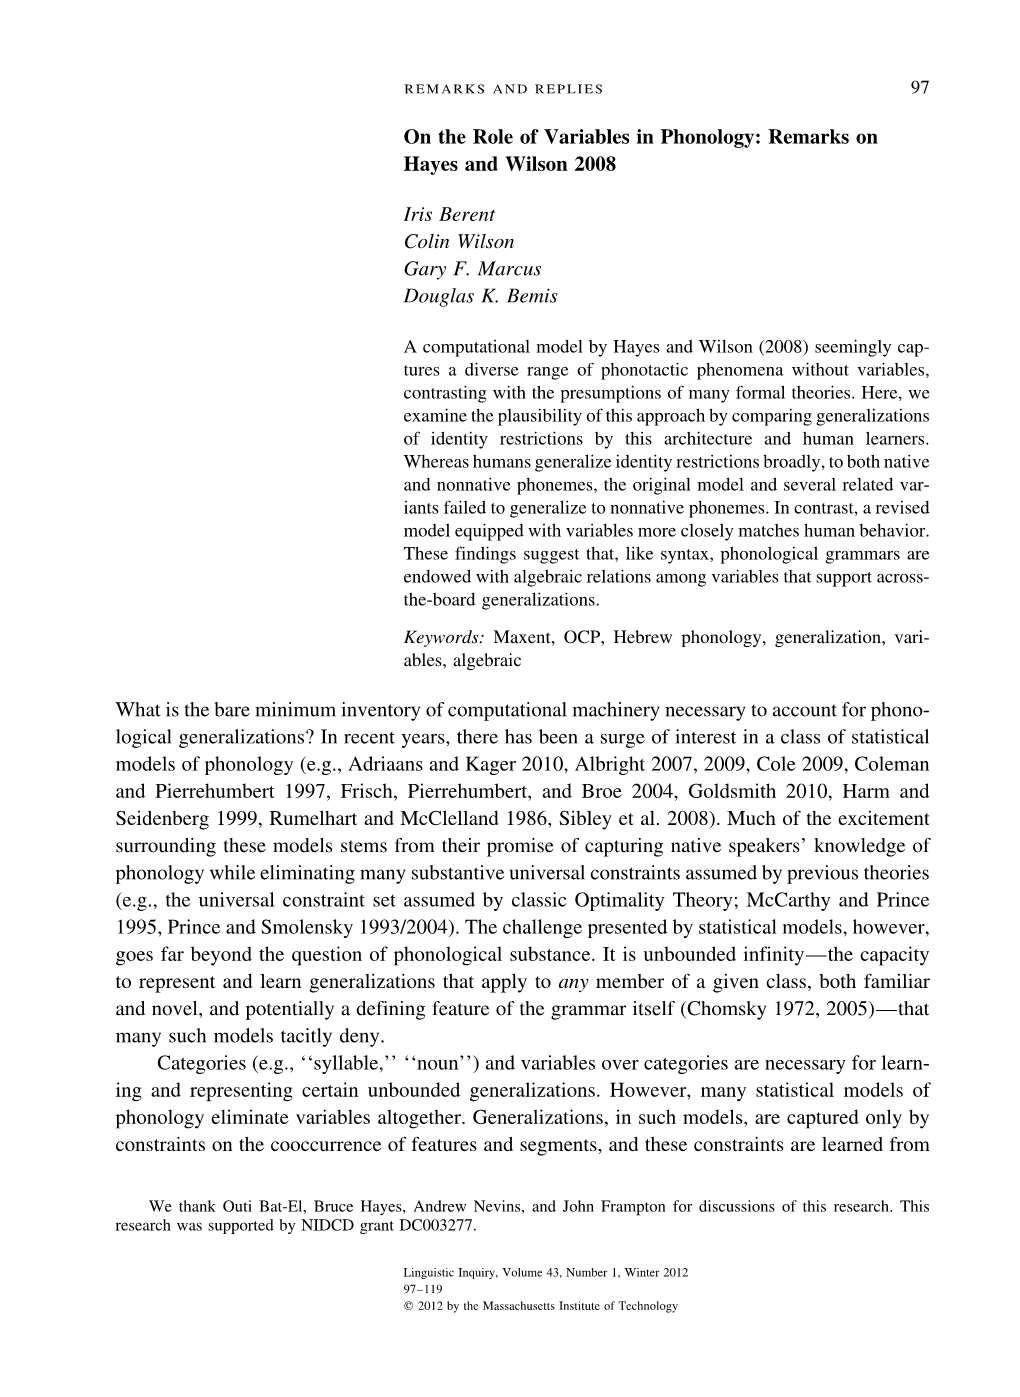 On the Role of Variables in Phonology: Remarks on Hayes and Wilson 2008